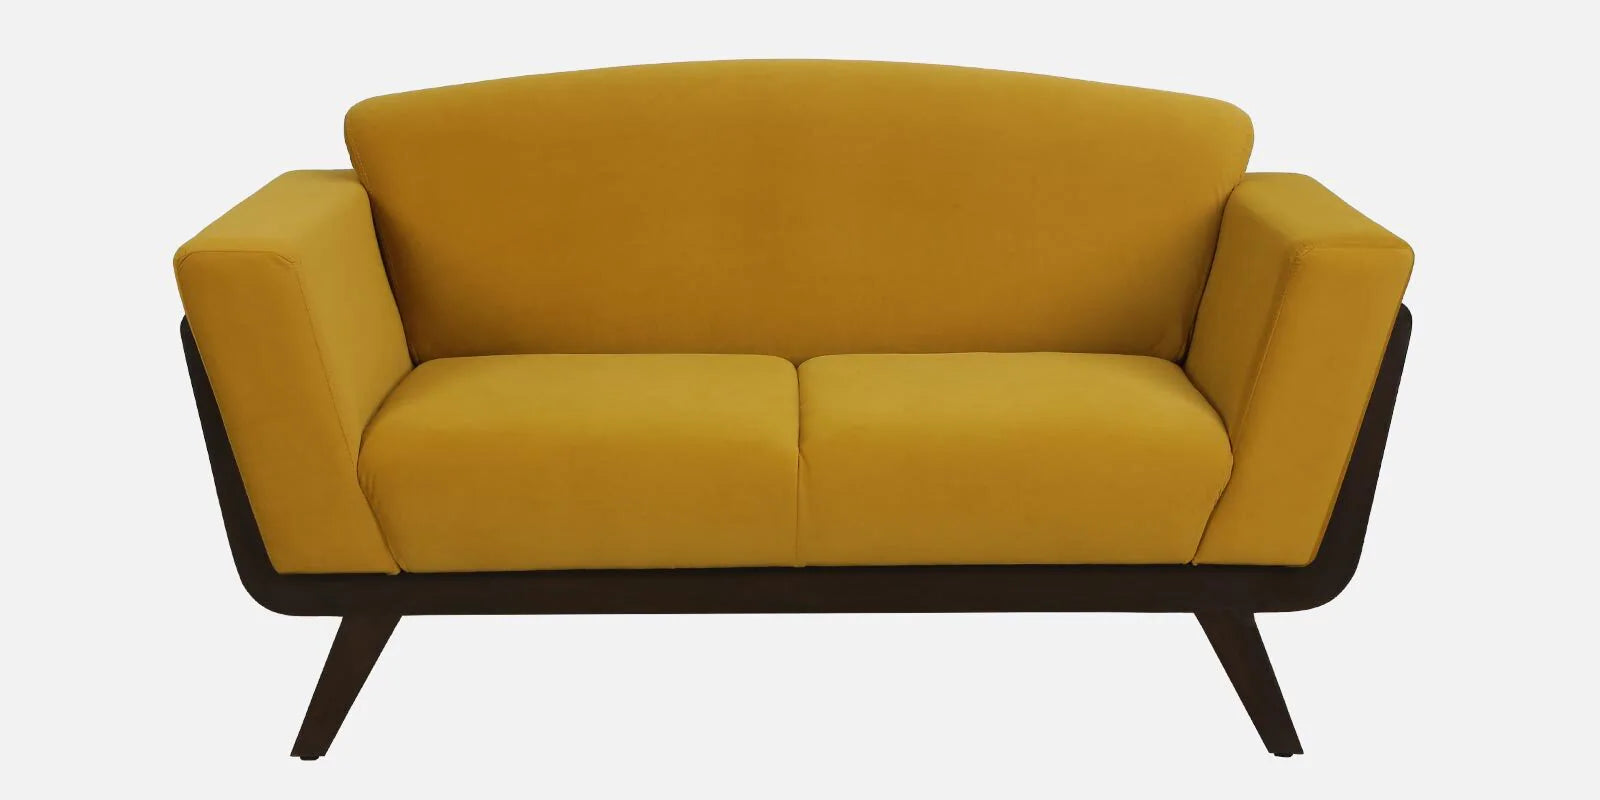 Solid Wood 2 Seater Sofa In Yellow Colour